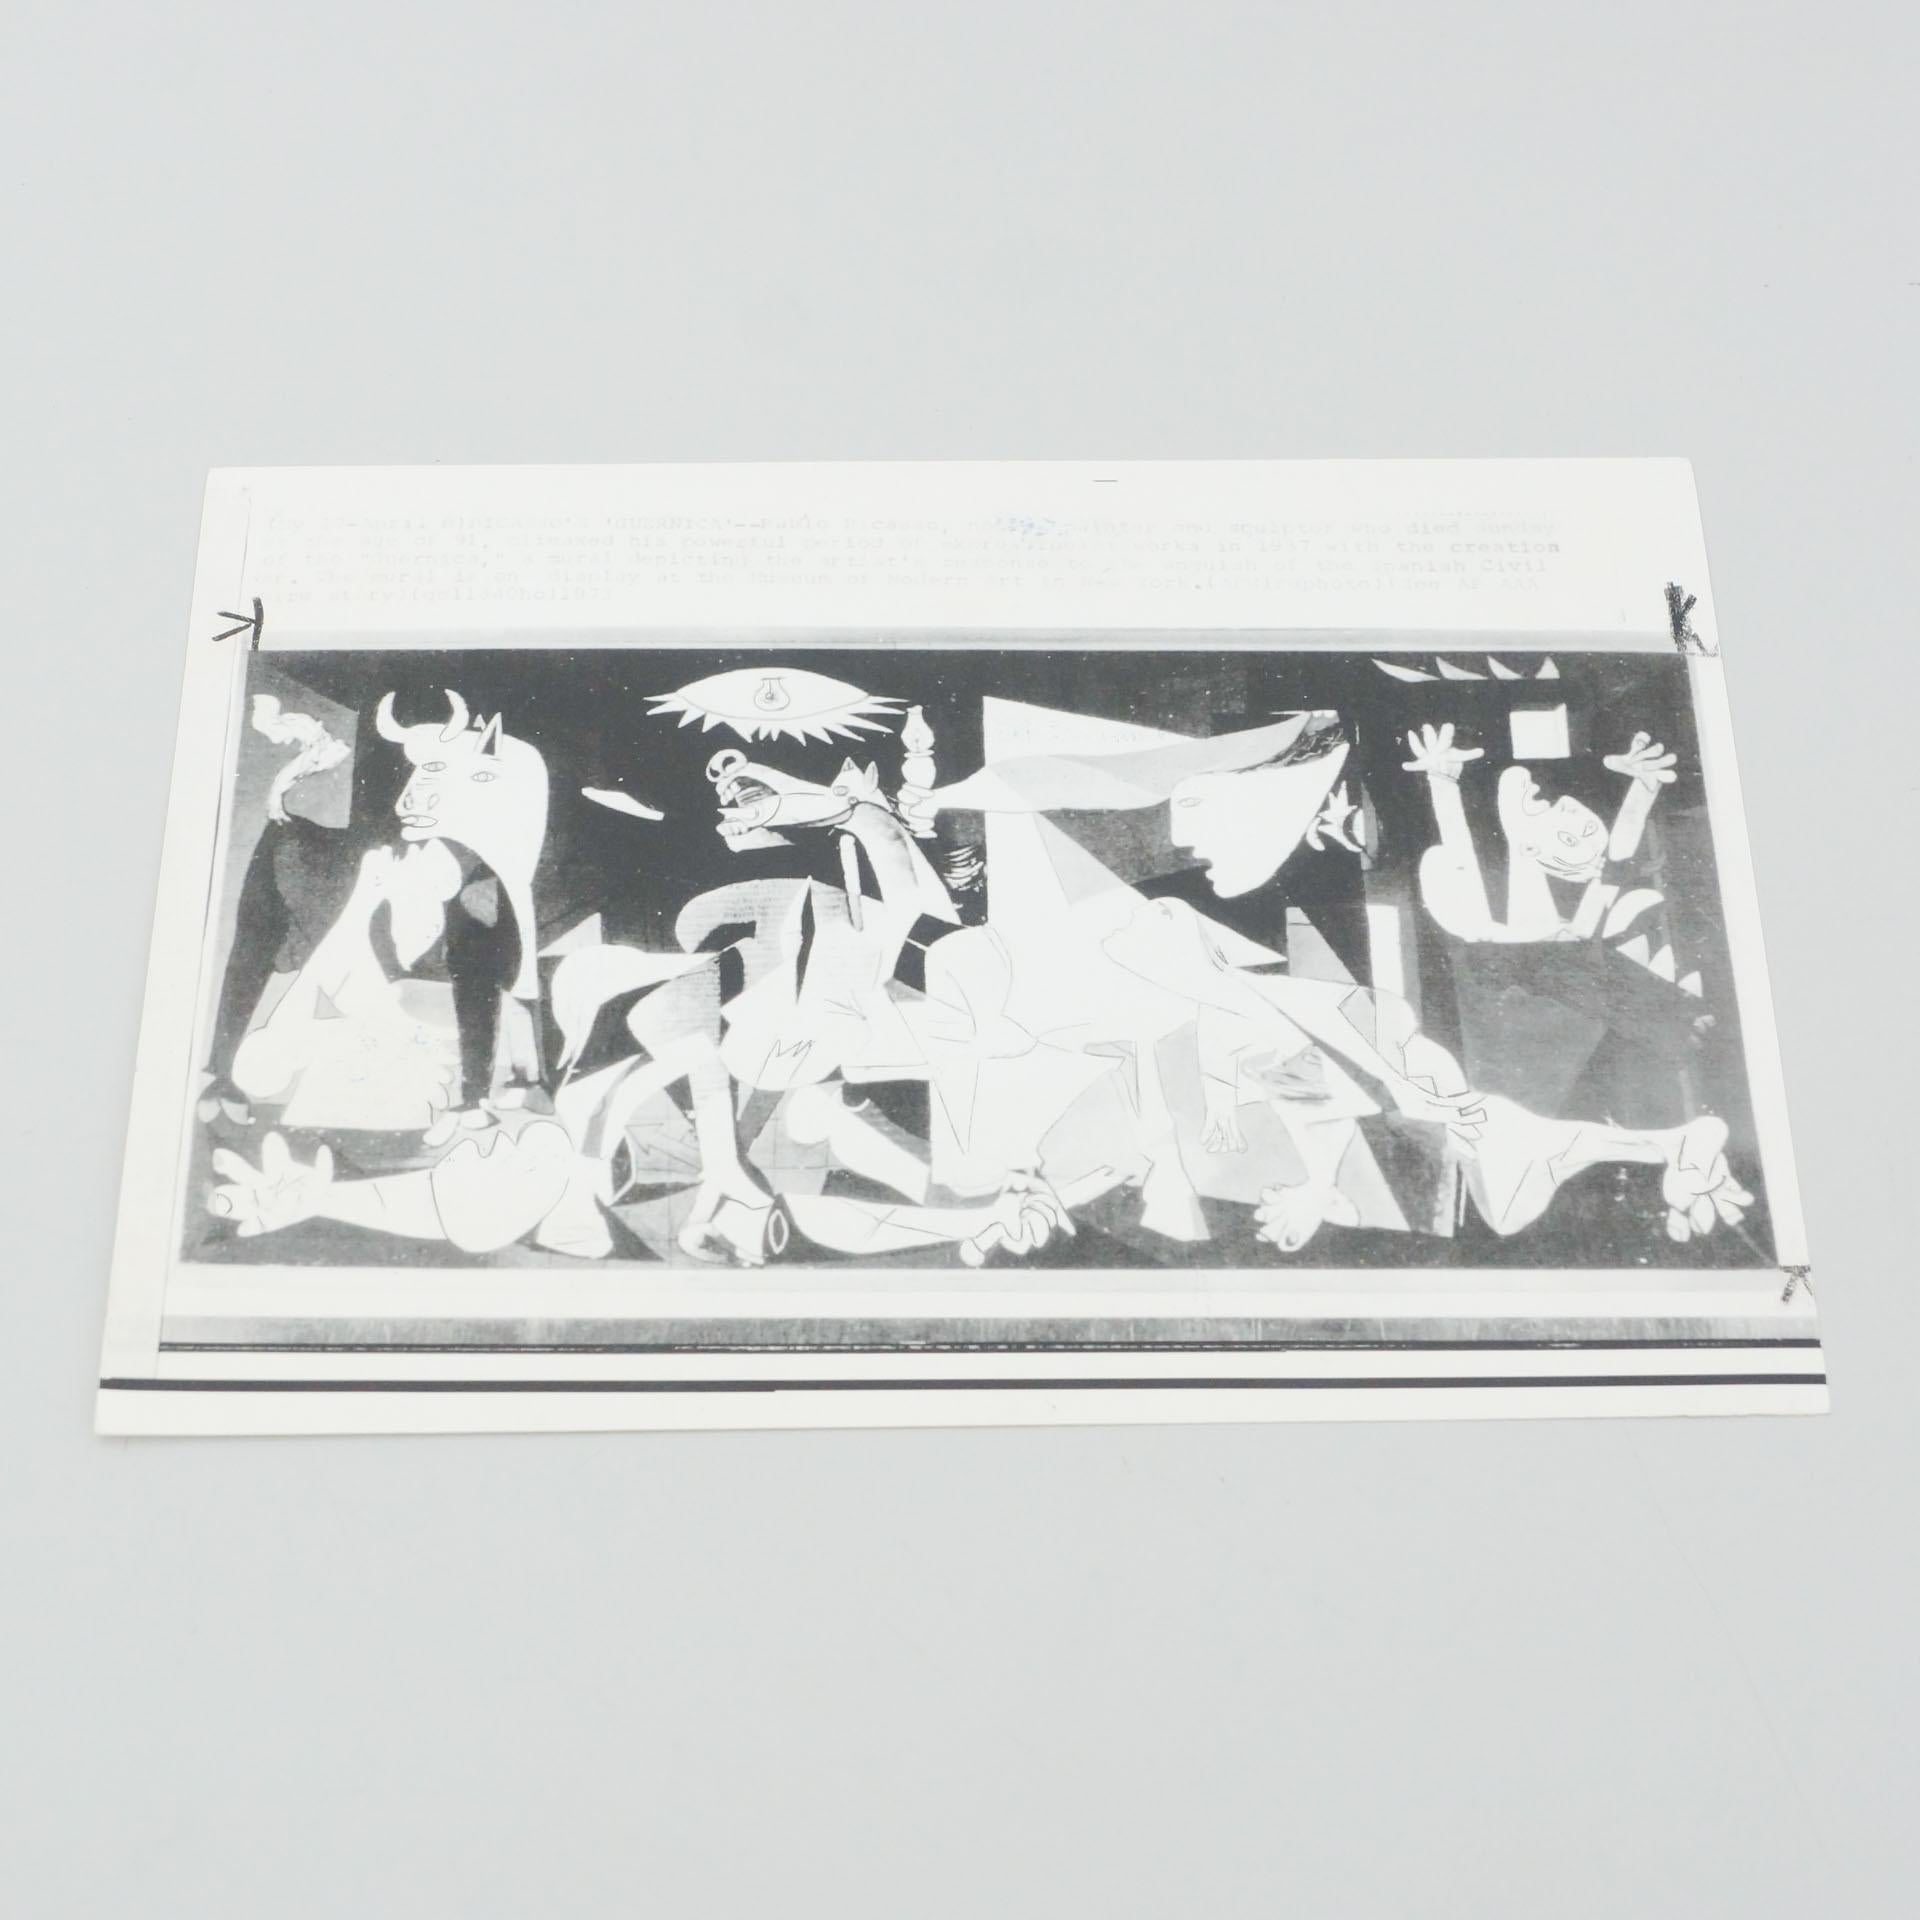 Black and white archive photography of Picasso Painting 'Guernica', 1973.

In original condition, with minor wear consistent with age and use, preserving a beautiful patina.

Materials:
Paper

Dimensions:
D 0.2 cm x W 23.9 cm x H 16.9 cm.